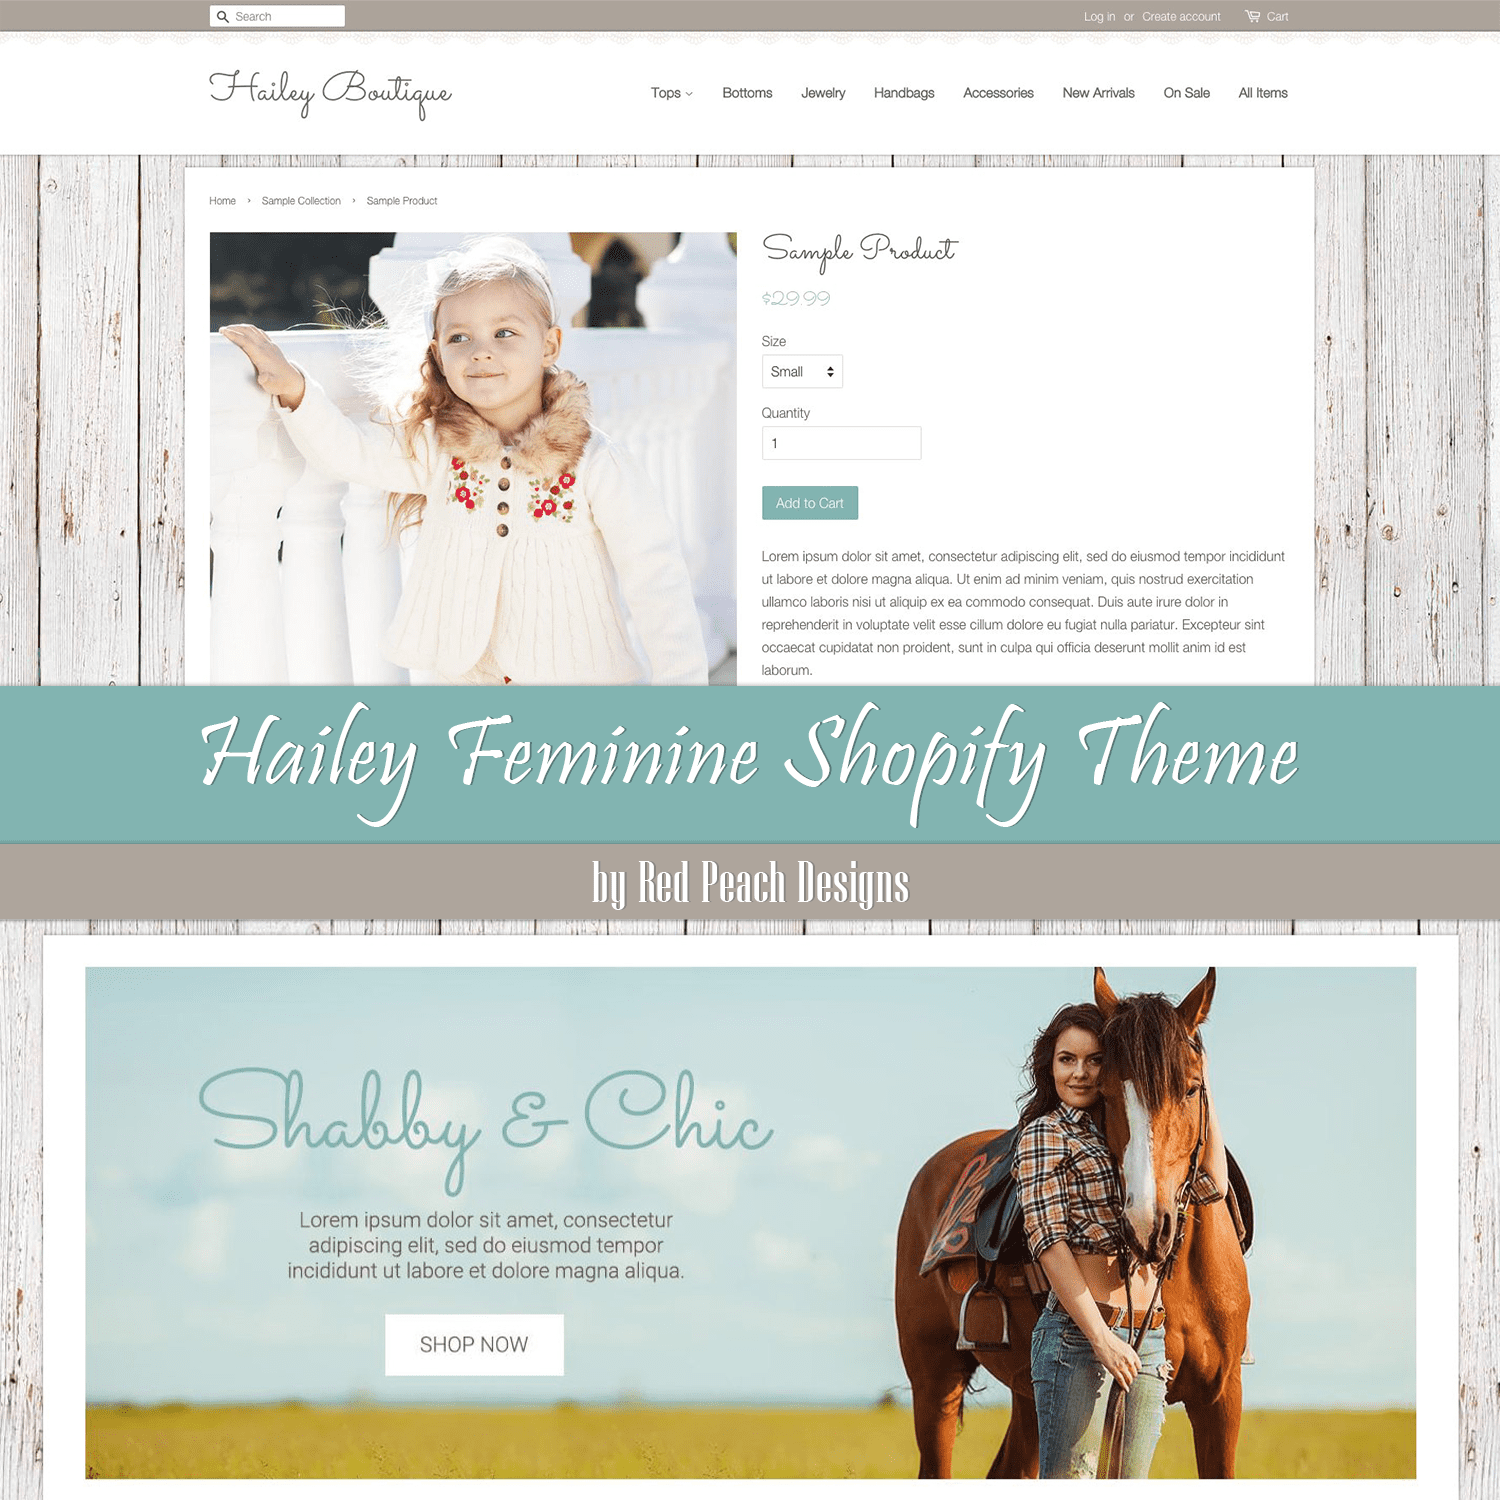 Hailey Feminine Shopify Theme from Red Peach Designs.